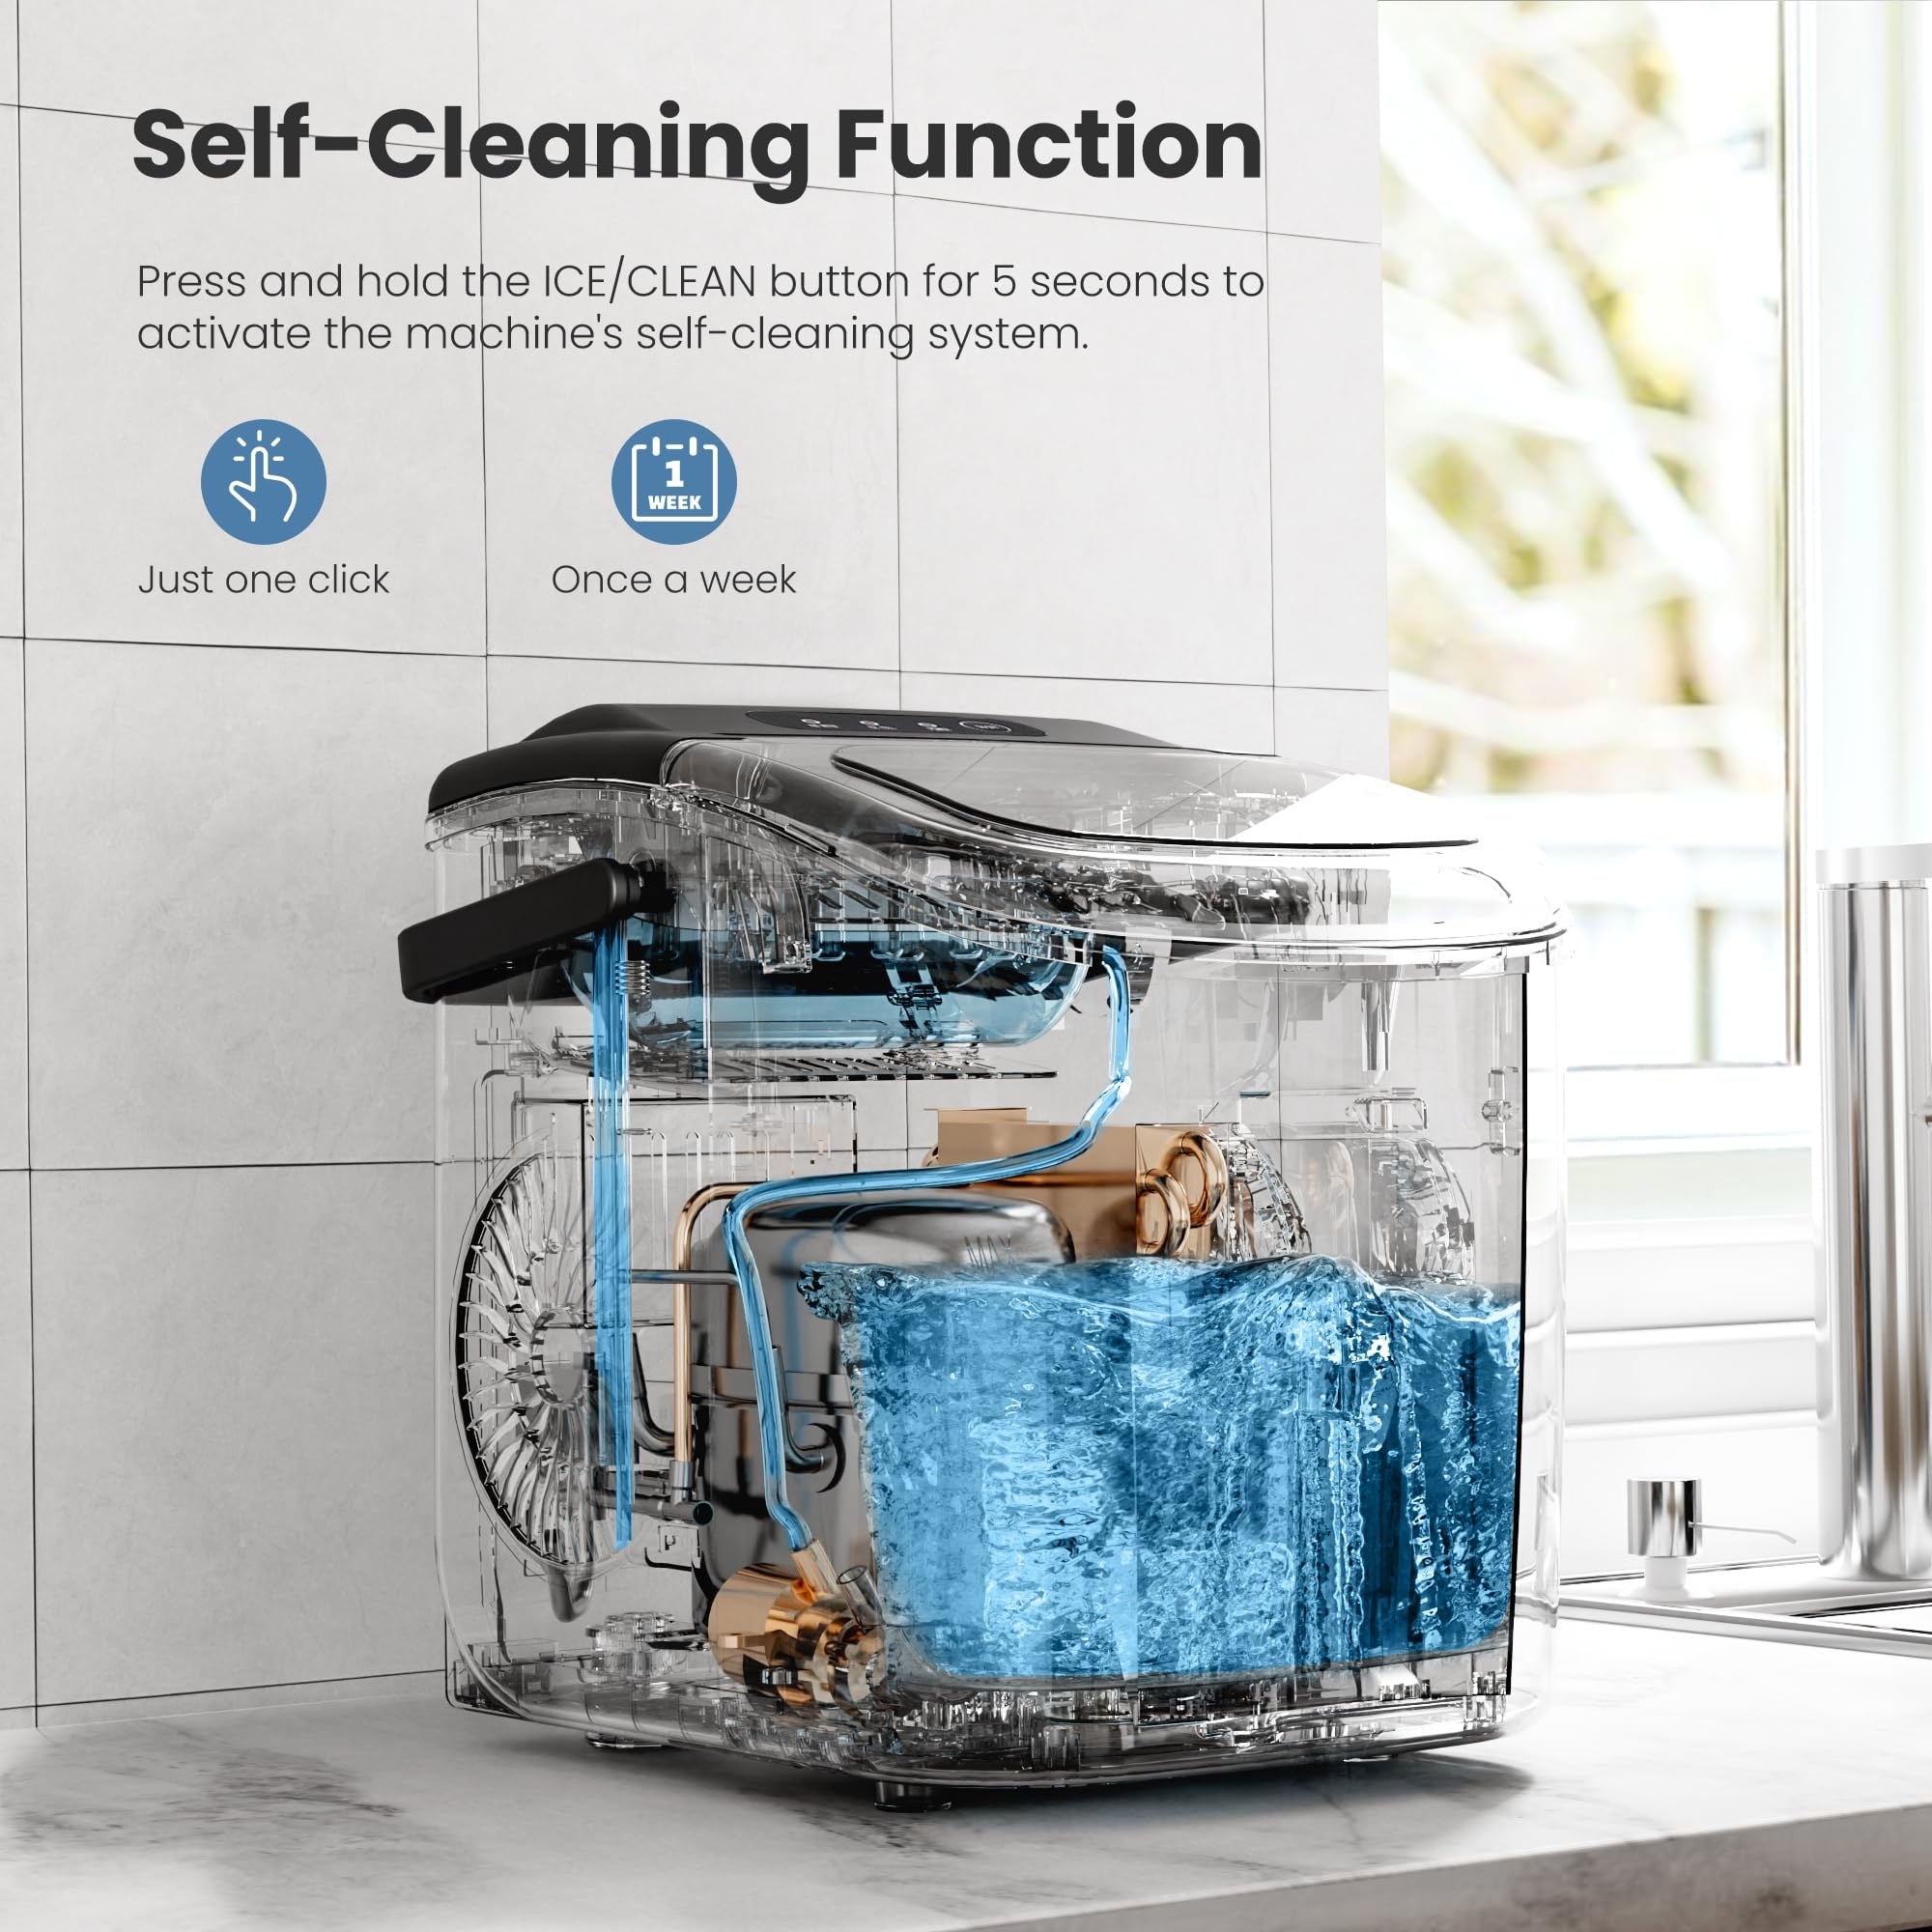 Ice Makers Countertop, Portable Ice Maker Machine with Handle,  Self-Cleaning Ice Maker, for Home/Office/Kitchen - On Sale - Bed Bath &  Beyond - 35665430